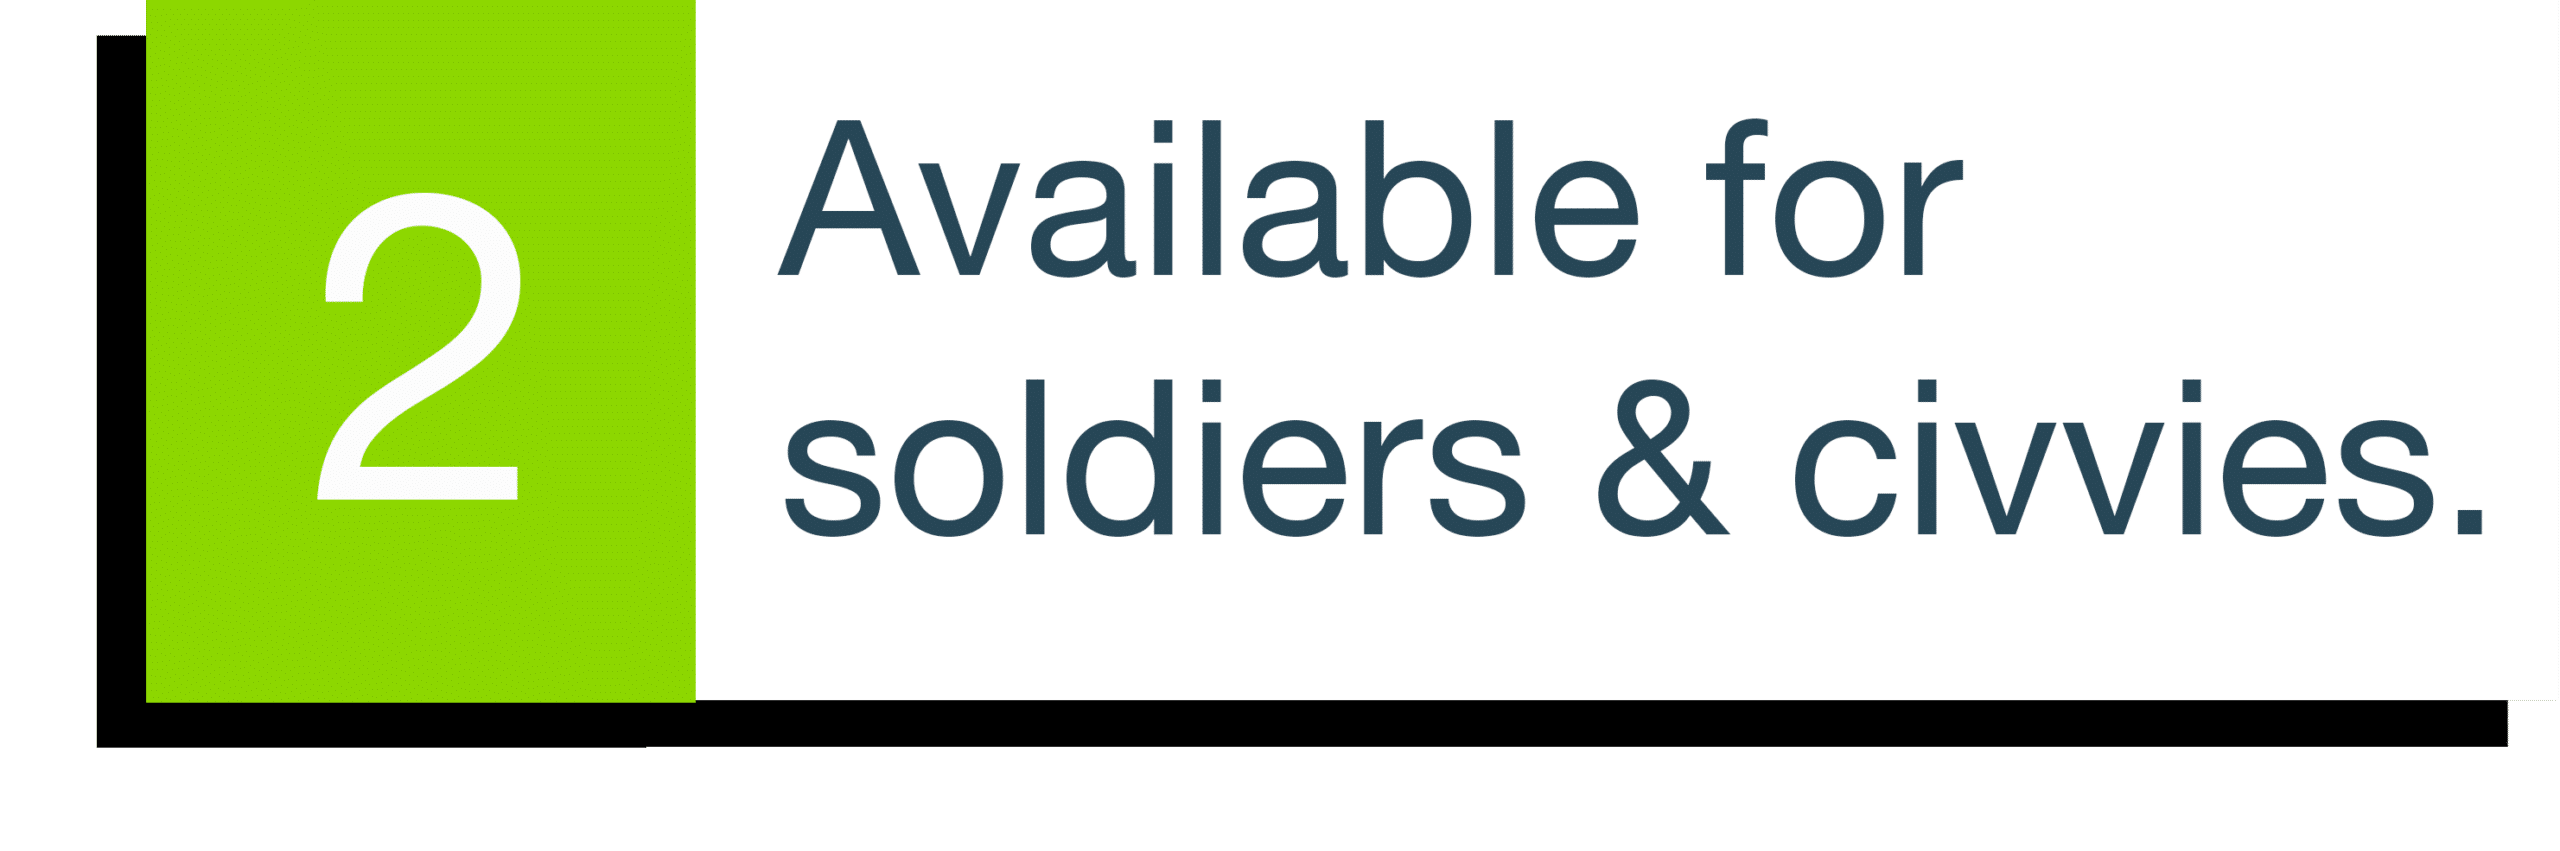 Available-for-soldiers-and-civvies